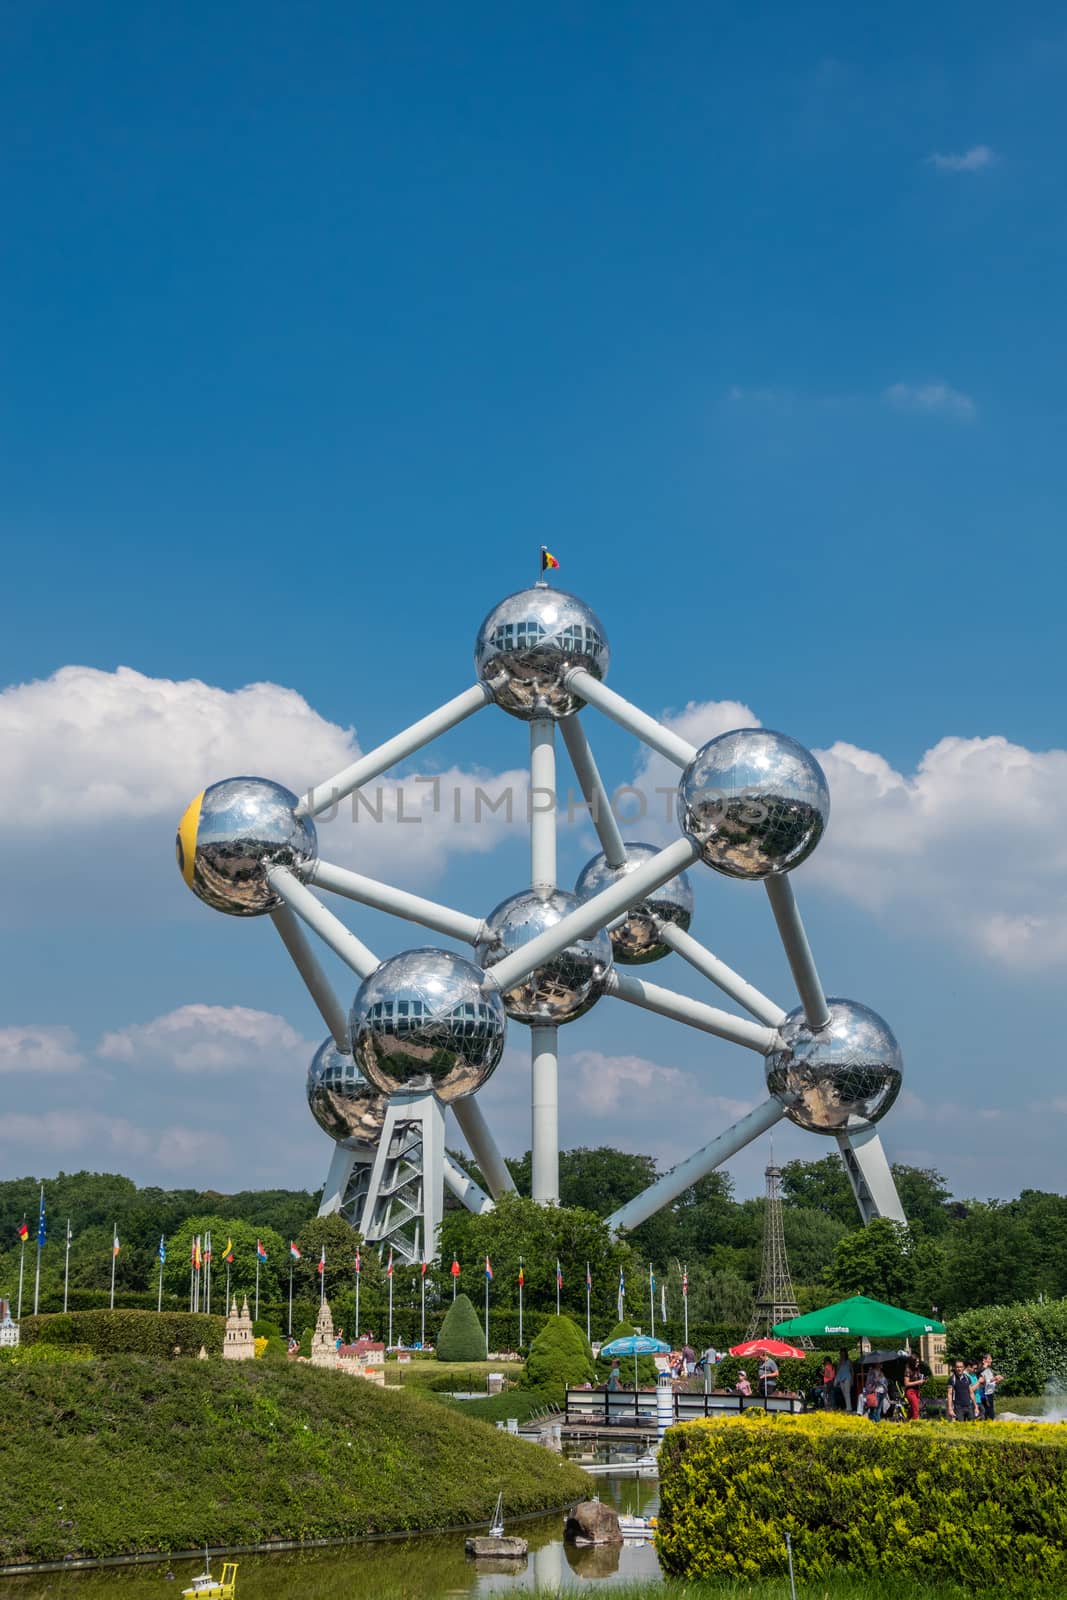 Atomium monument seen from Mini-Europe park in Brussels, Belgium by Claudine